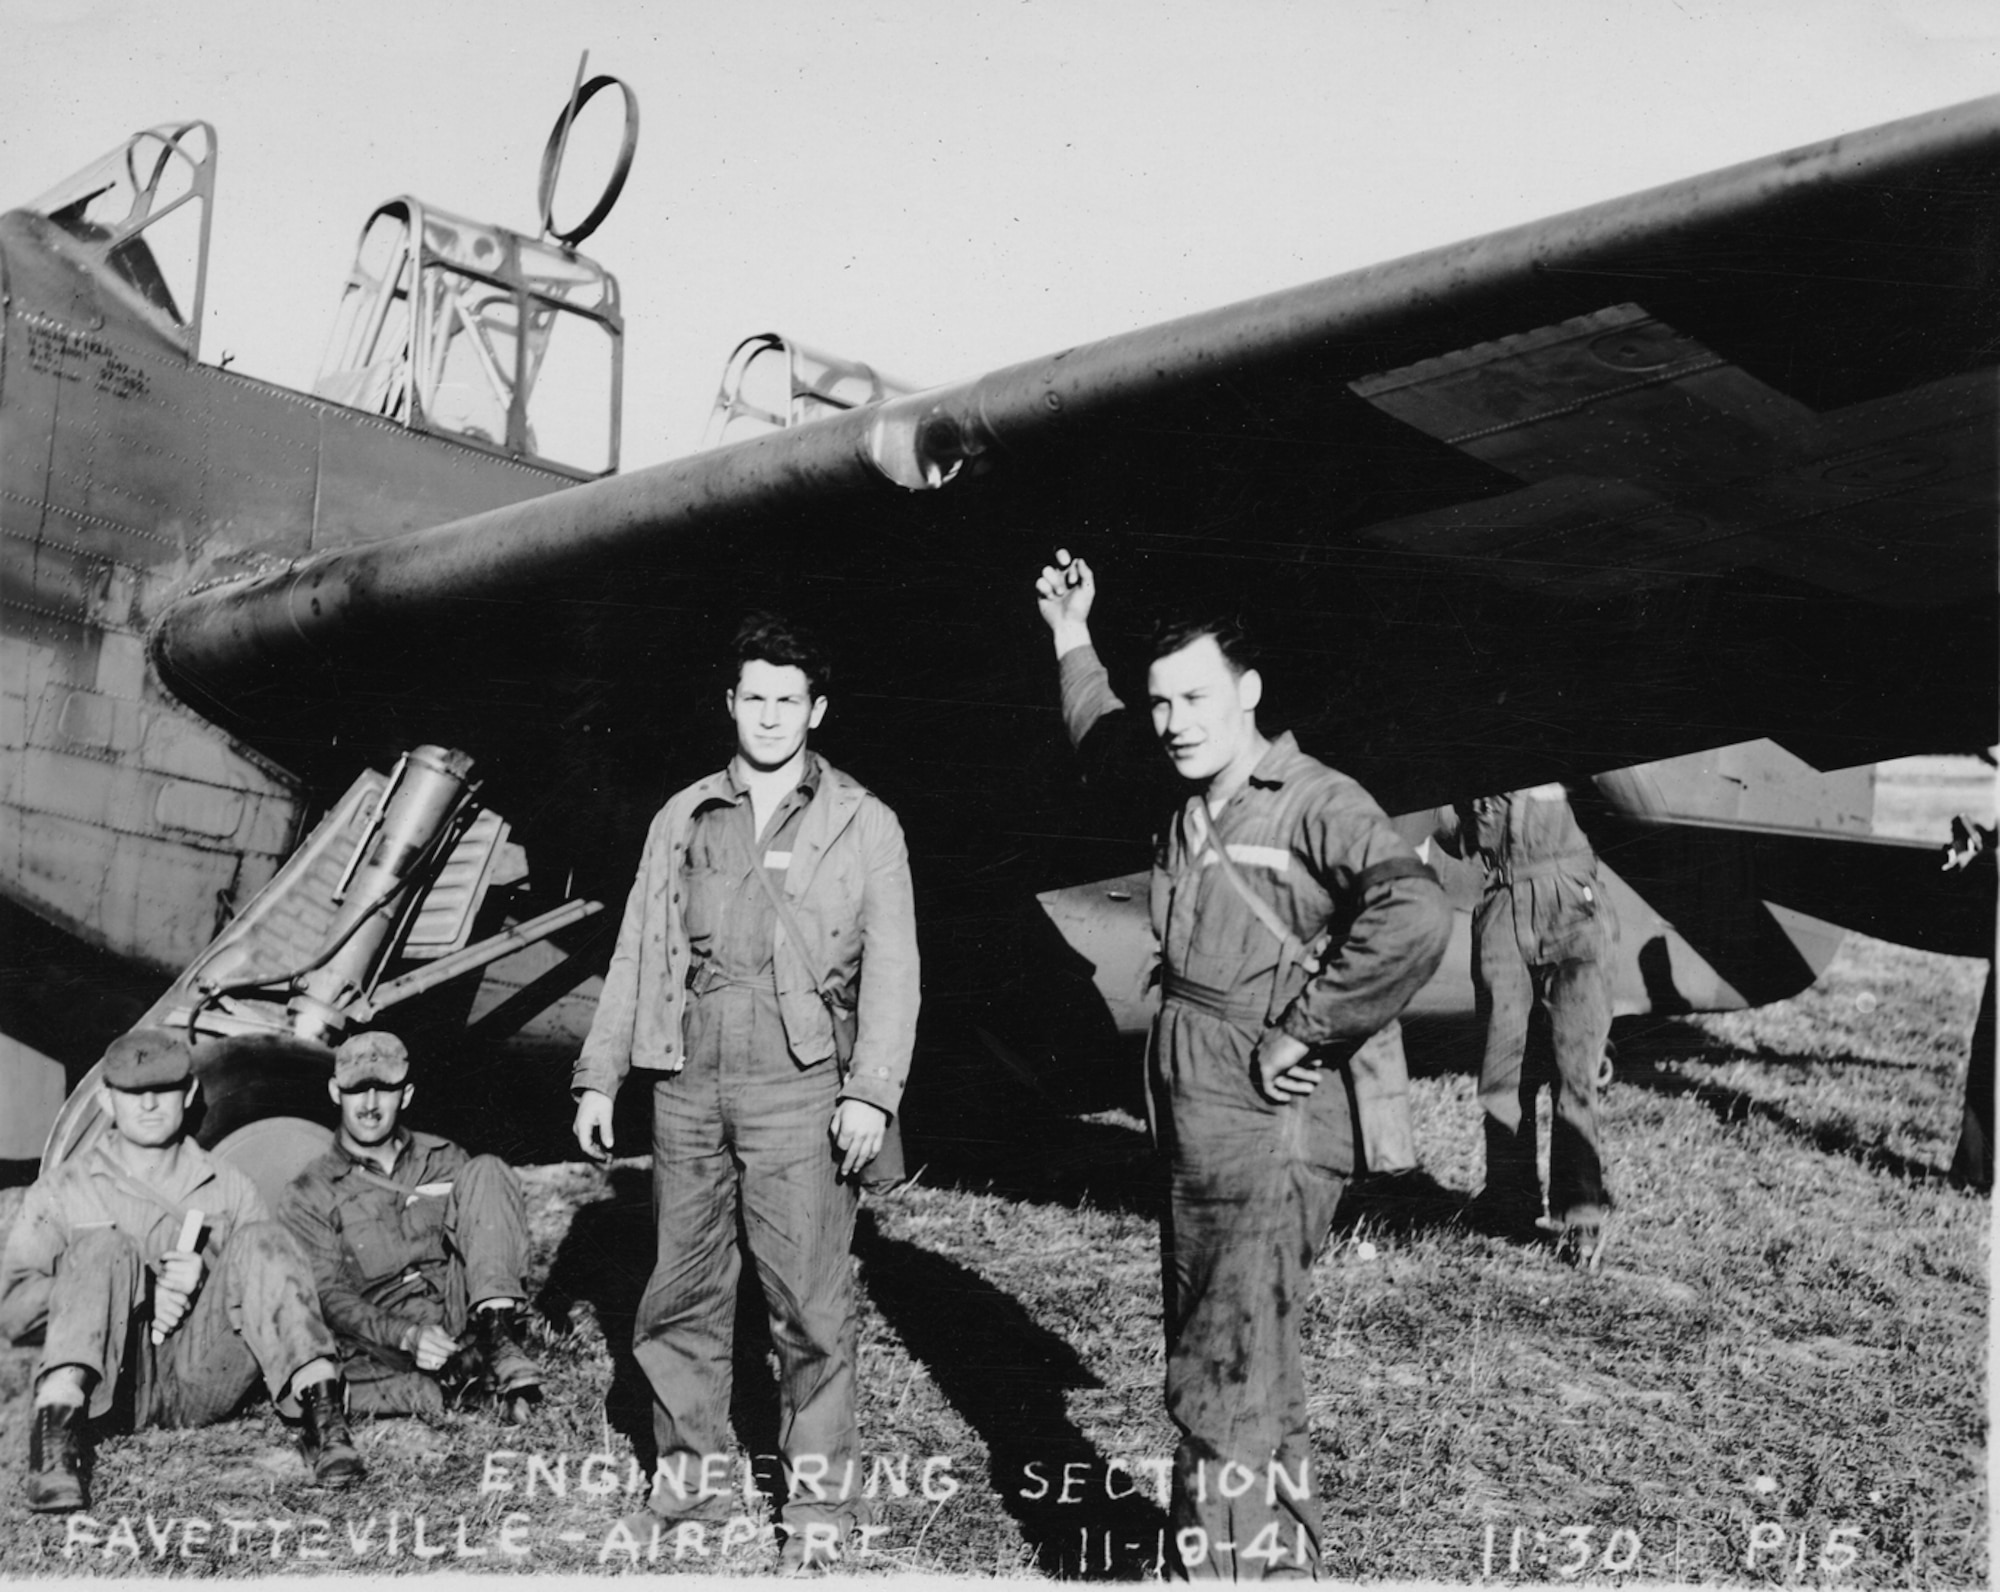 Maryland Guardsmen of the 104th Observation Squadron's Engineering Section take a break under the wing of one of the squadron's O-47 aircraft during training at Fayetteville Airport, N.C., Nov. 19, 1941. The unit, along with the rest of the Maryland National Guard, had been mobilized in February in anticipation of World War II.